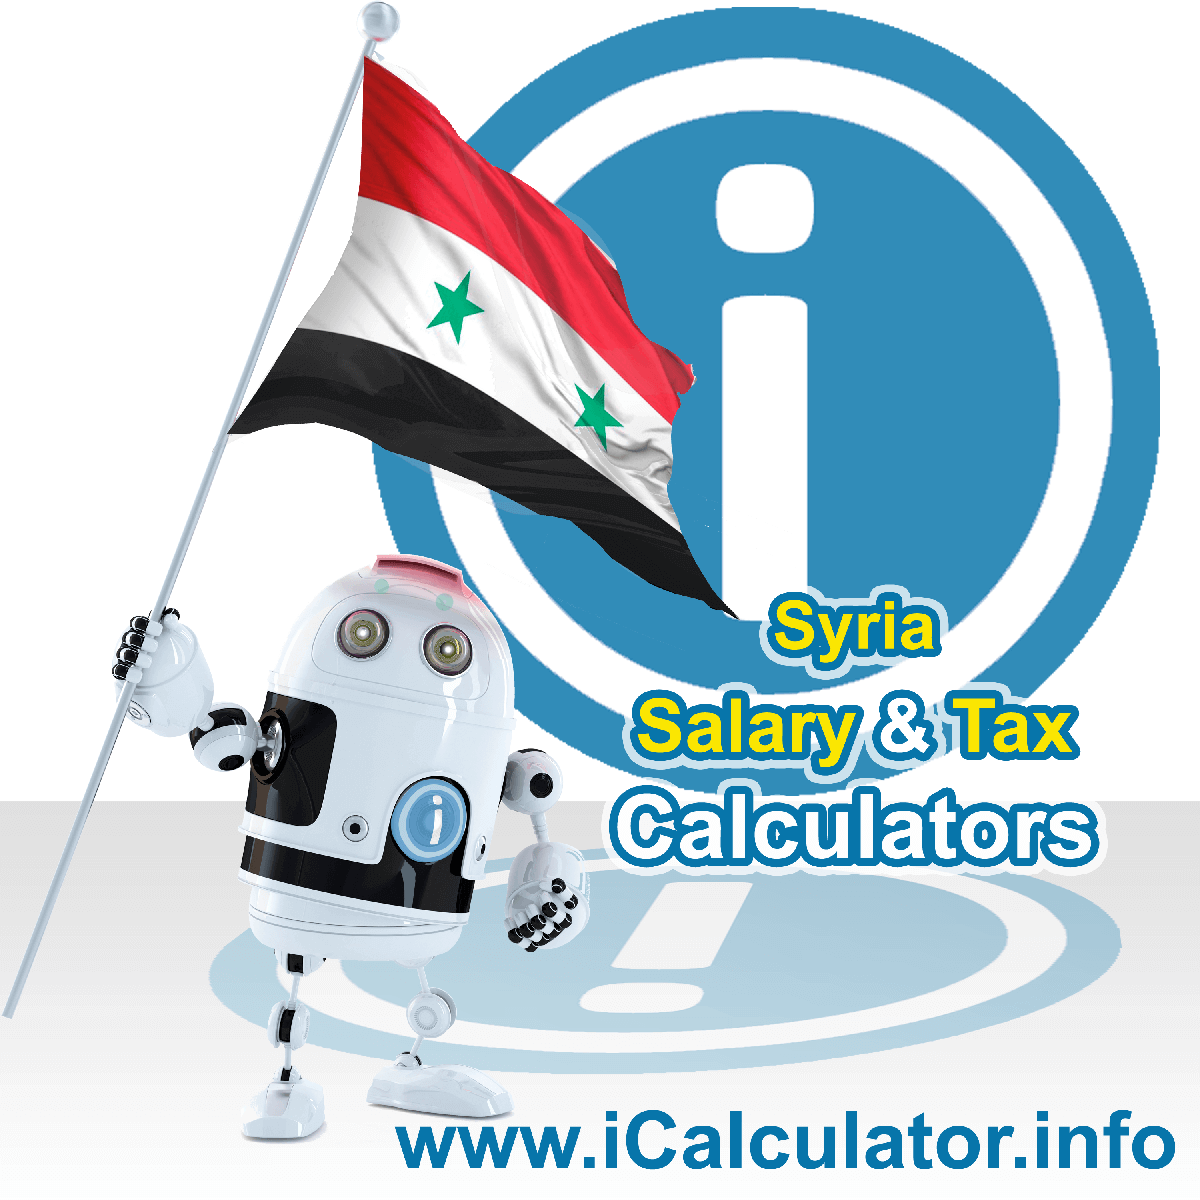 Syria Tax Calculator. This image shows the Syria flag and information relating to the tax formula for the Syria Salary Calculator